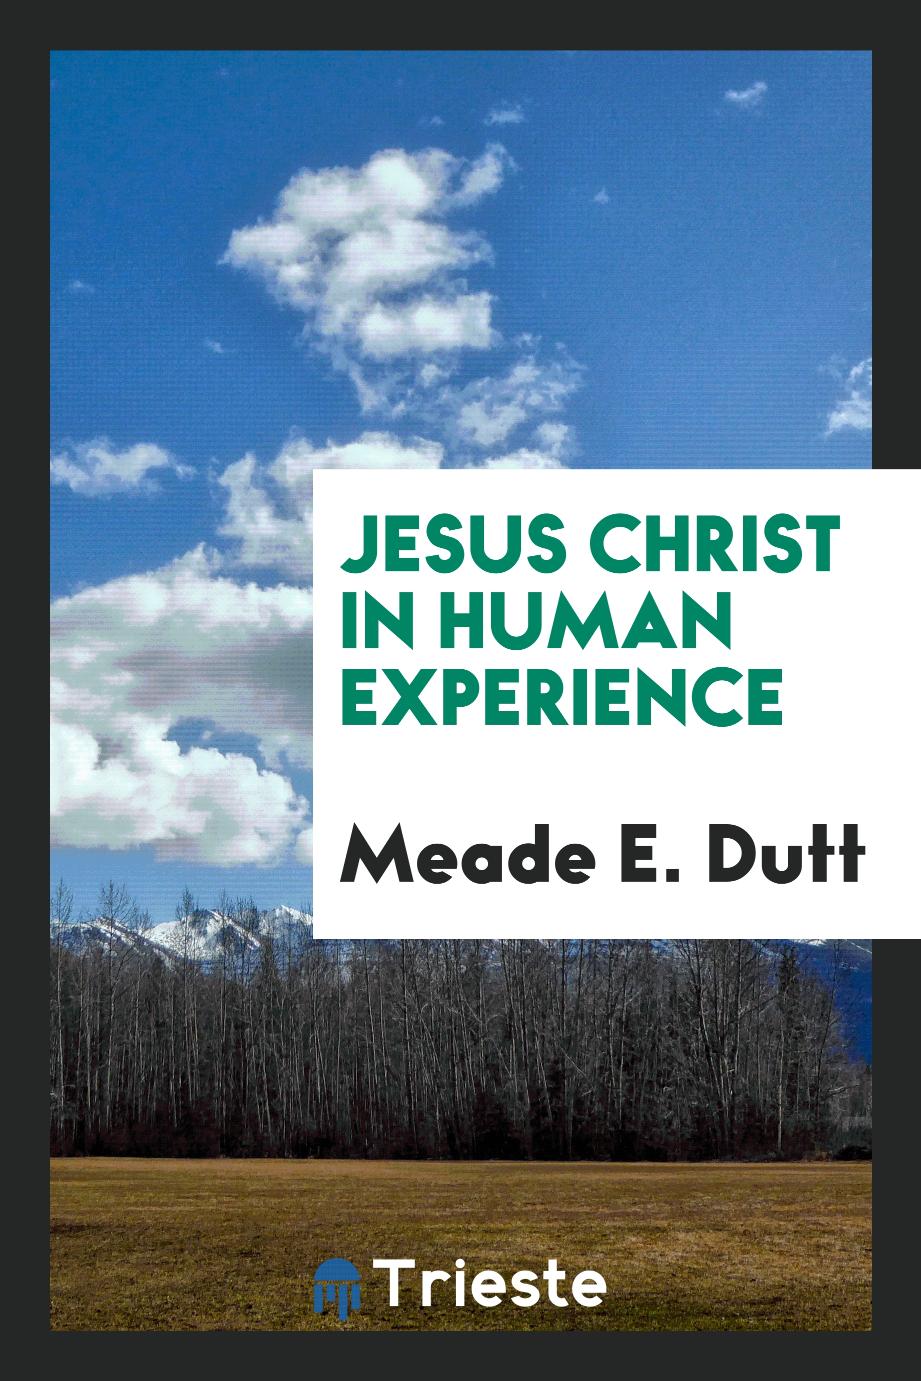 Jesus Christ in human experience